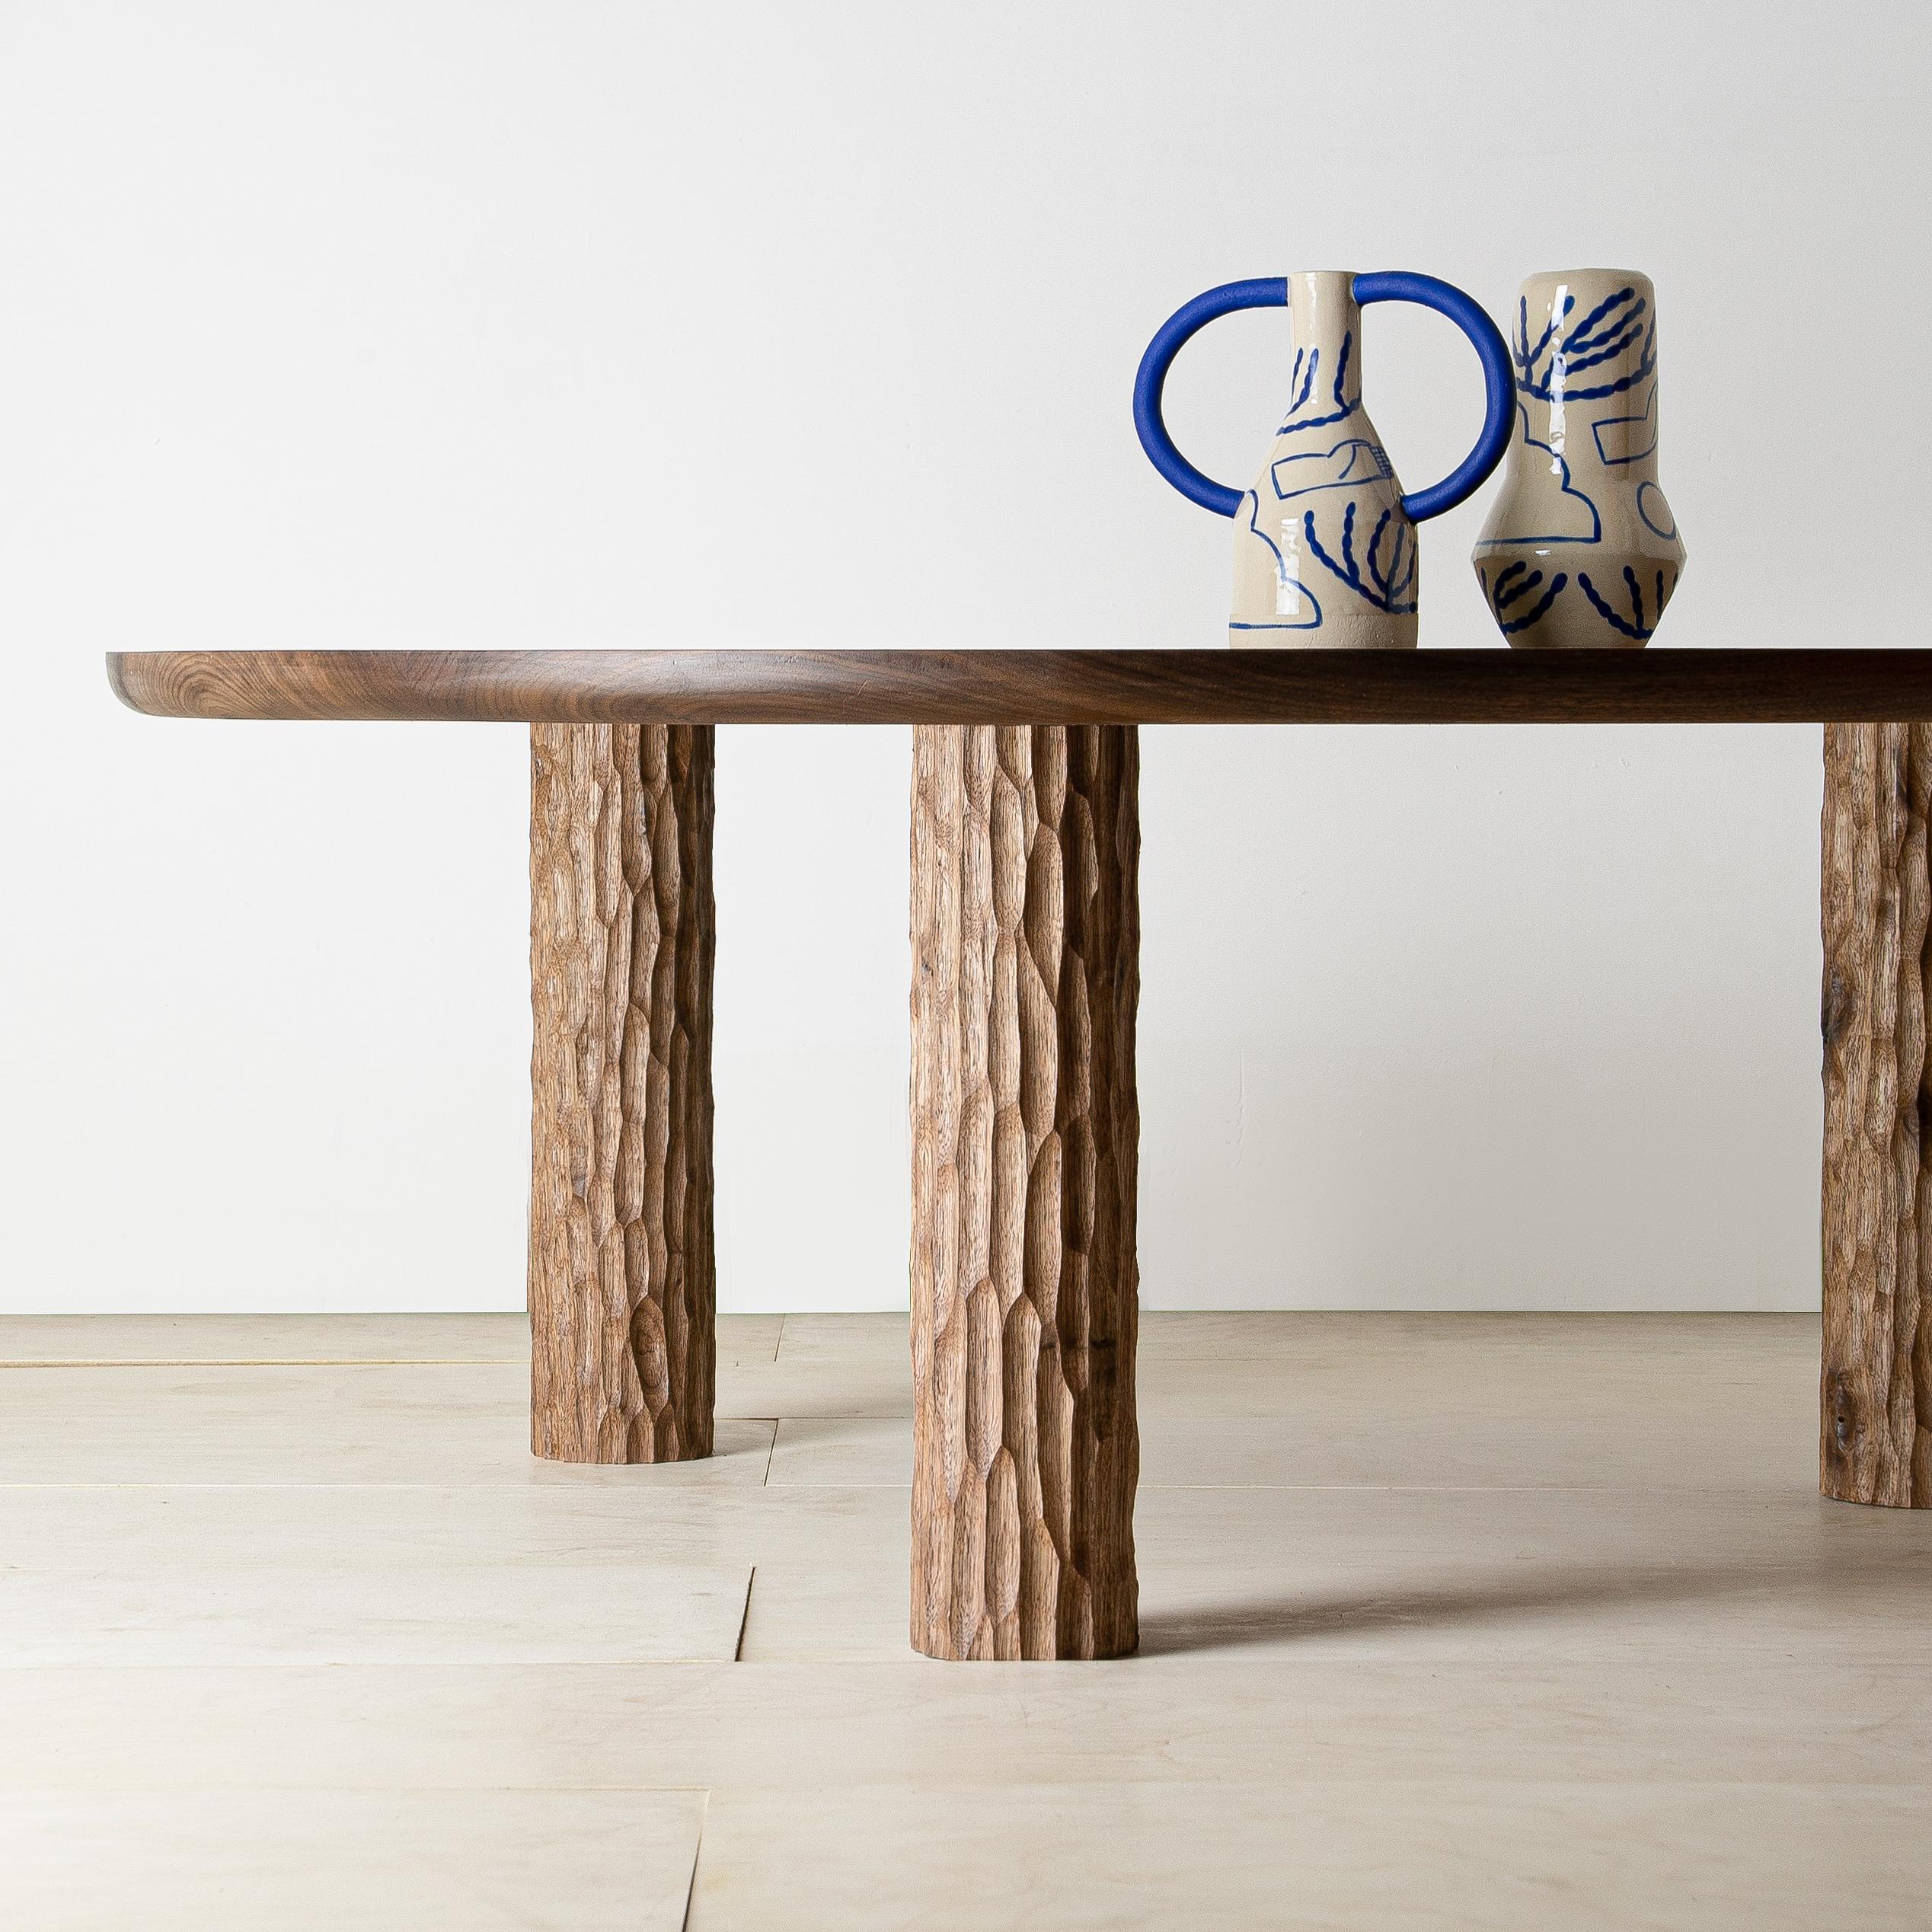 This striking yet pared back design is crafted from solid English walnut. Presenting contrasting textures, a generously-sized round tabletop sits atop three textured, hand-carved cylinders. Utilising traditional joinery, the two elements are joined